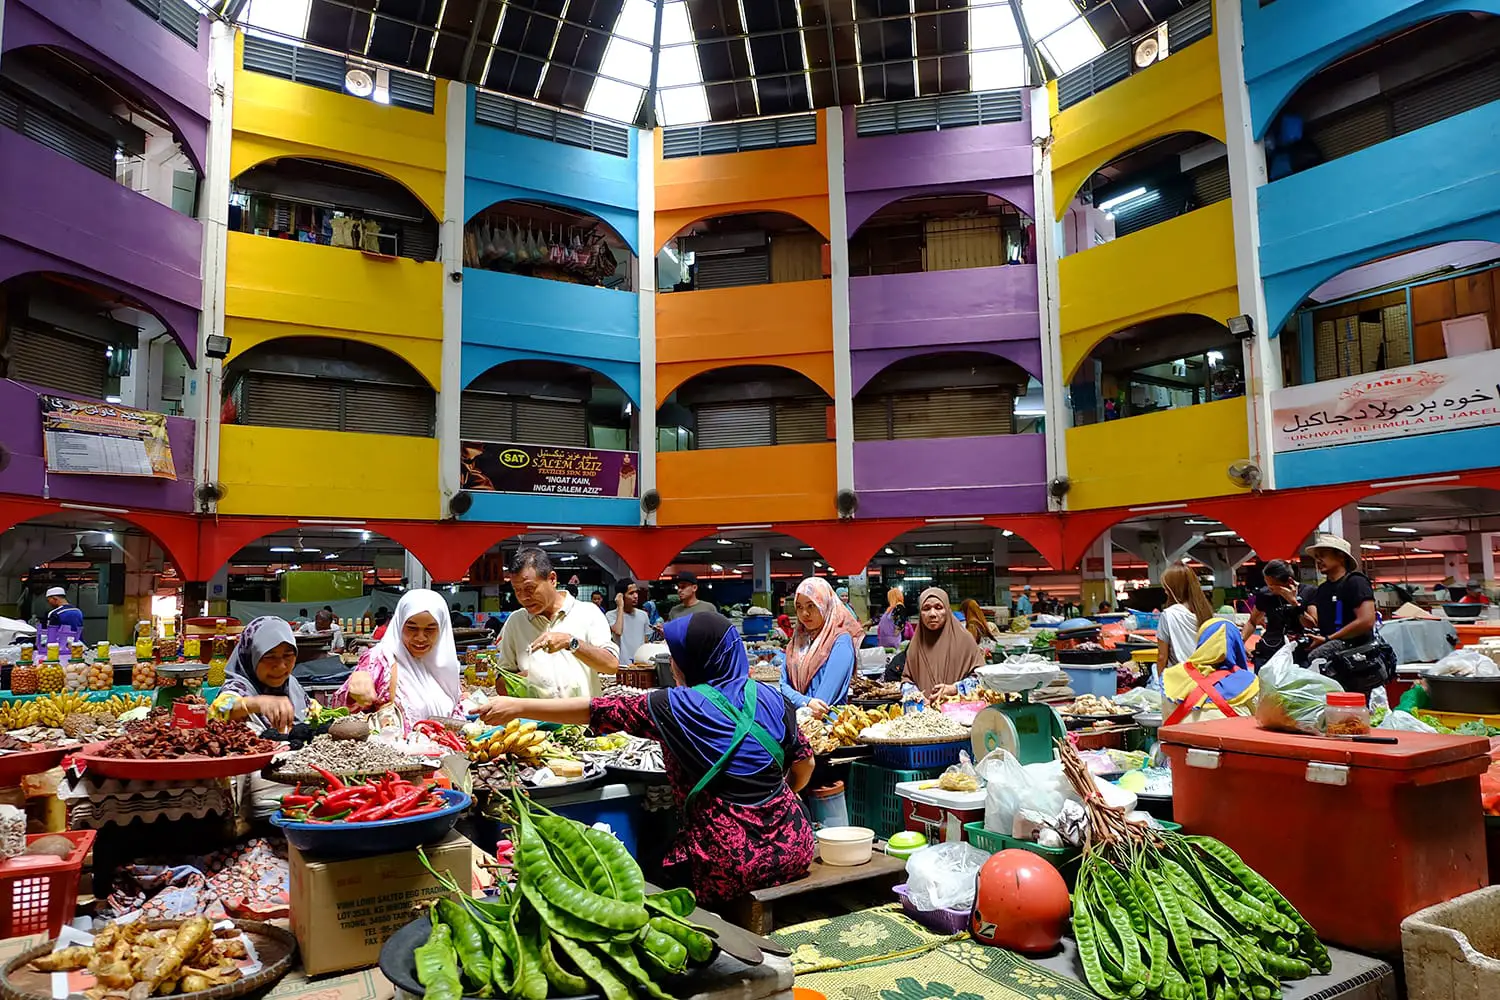 Here is the normal situation in Siti Khadijah Market which is the focus of tourists and locals to buy their daily necessities. Bharu, Malaysia